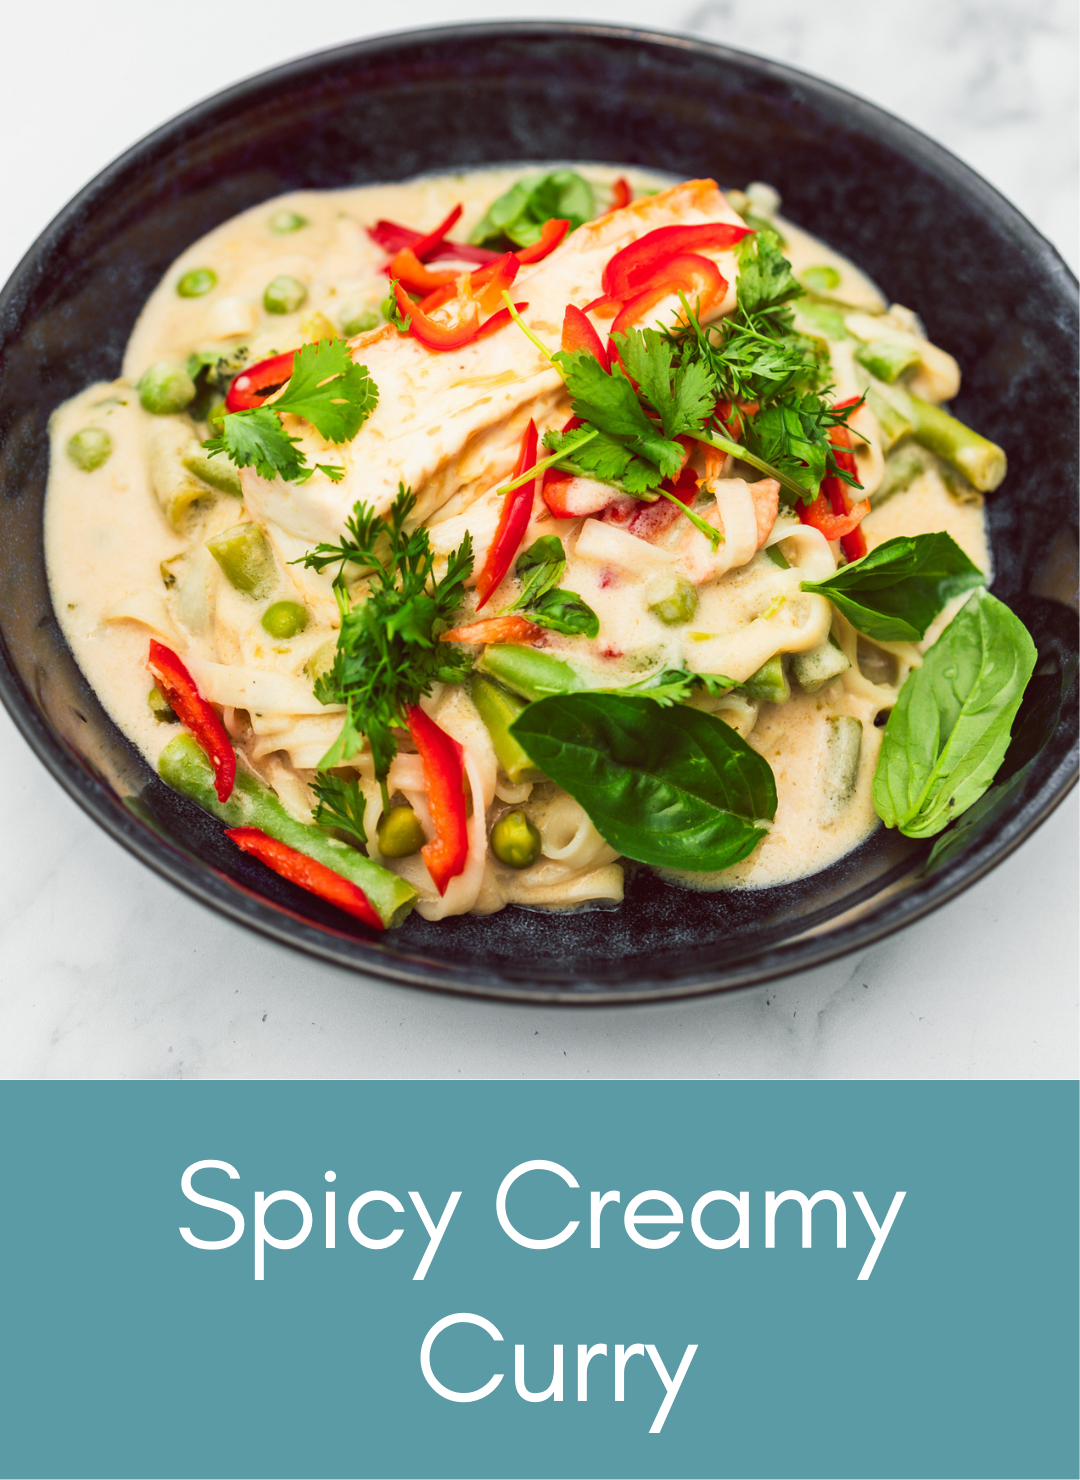 Whole food plant based vegan spicy creamy curry Picture with link to recipe